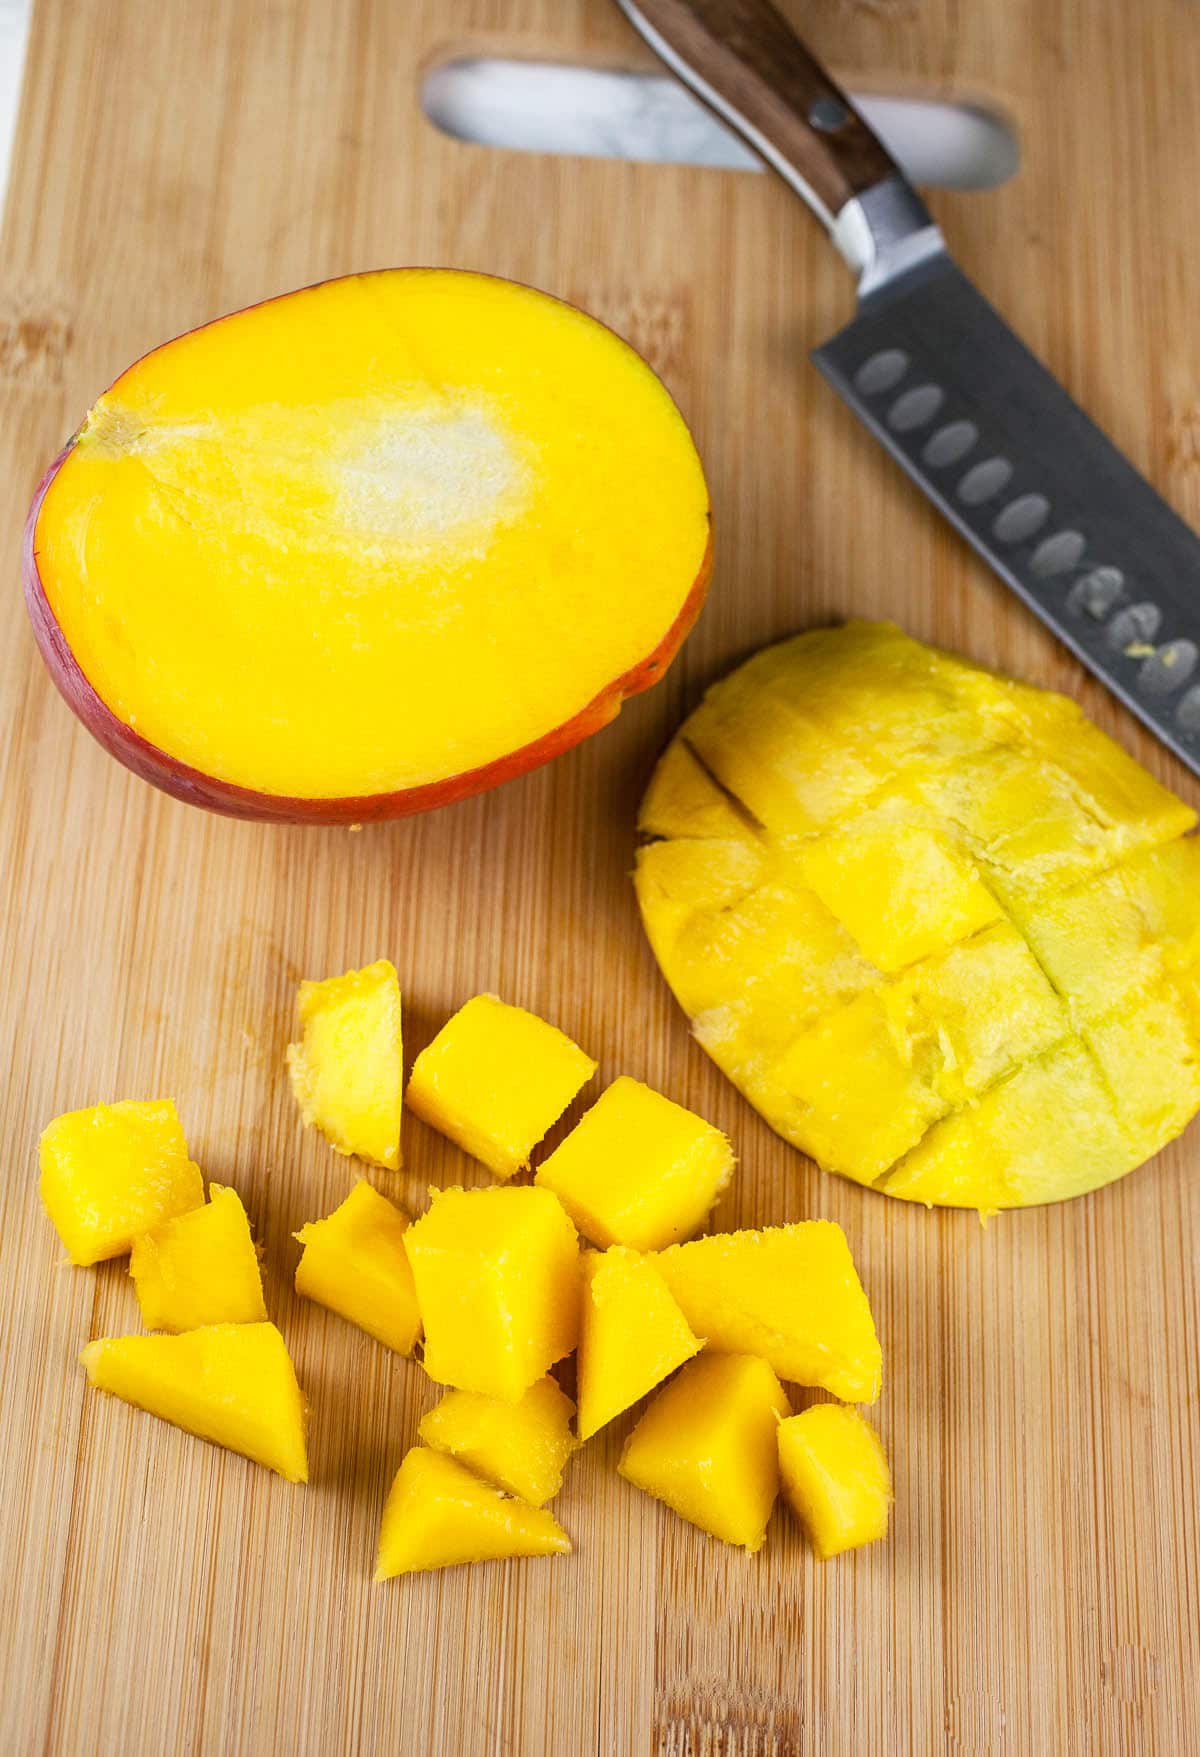 Mango cut into chunks on wooden cutting board with knife.